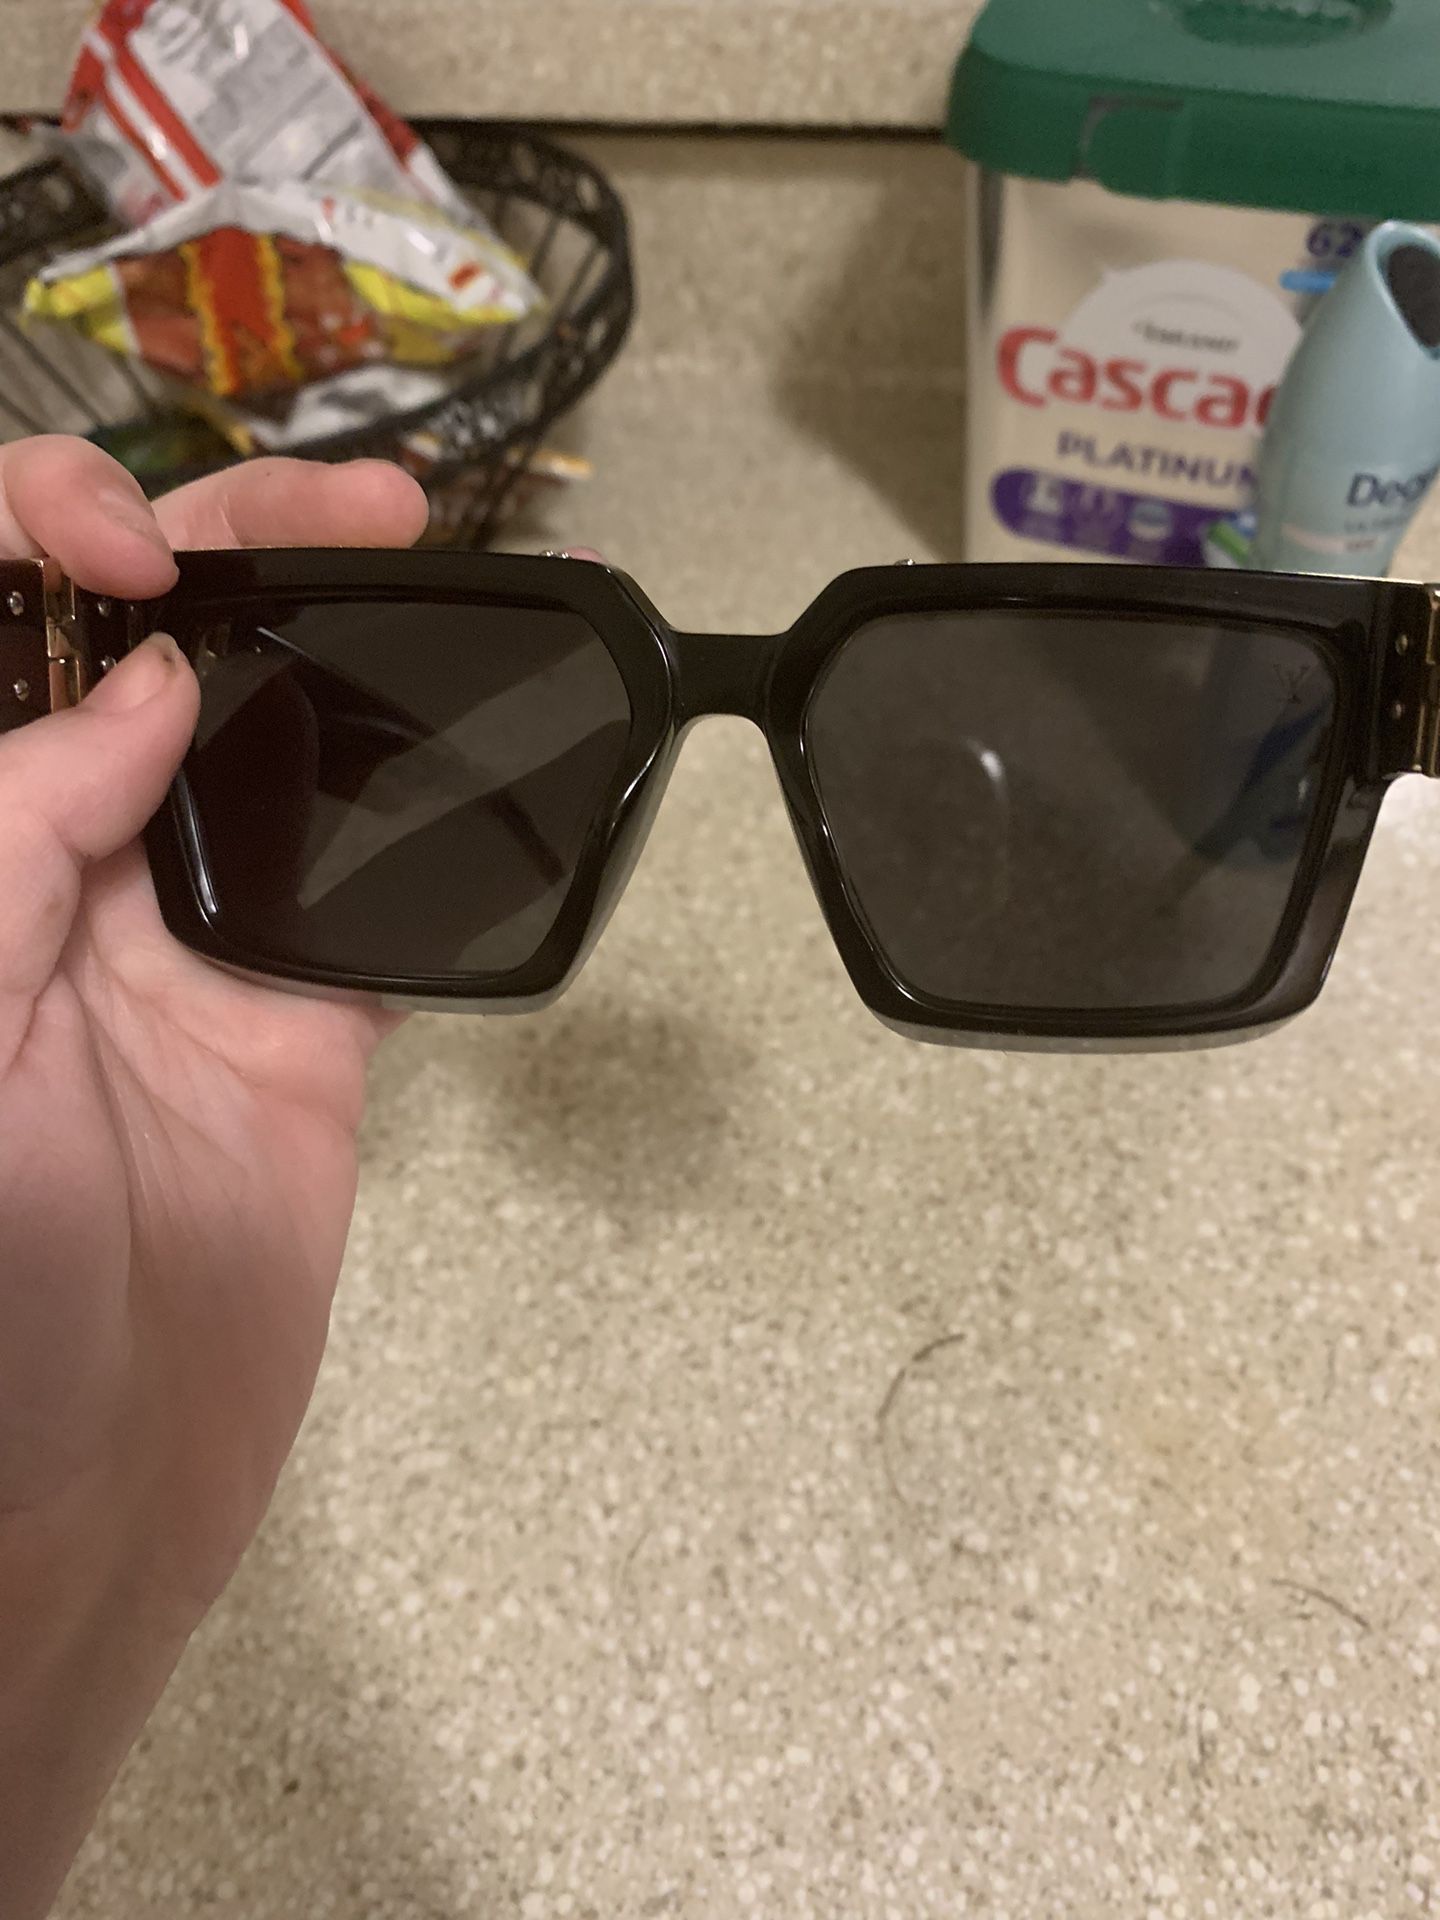 Louis Vuitton “The Party” Aviator Sunglasses for Sale in Mckinney, TX -  OfferUp